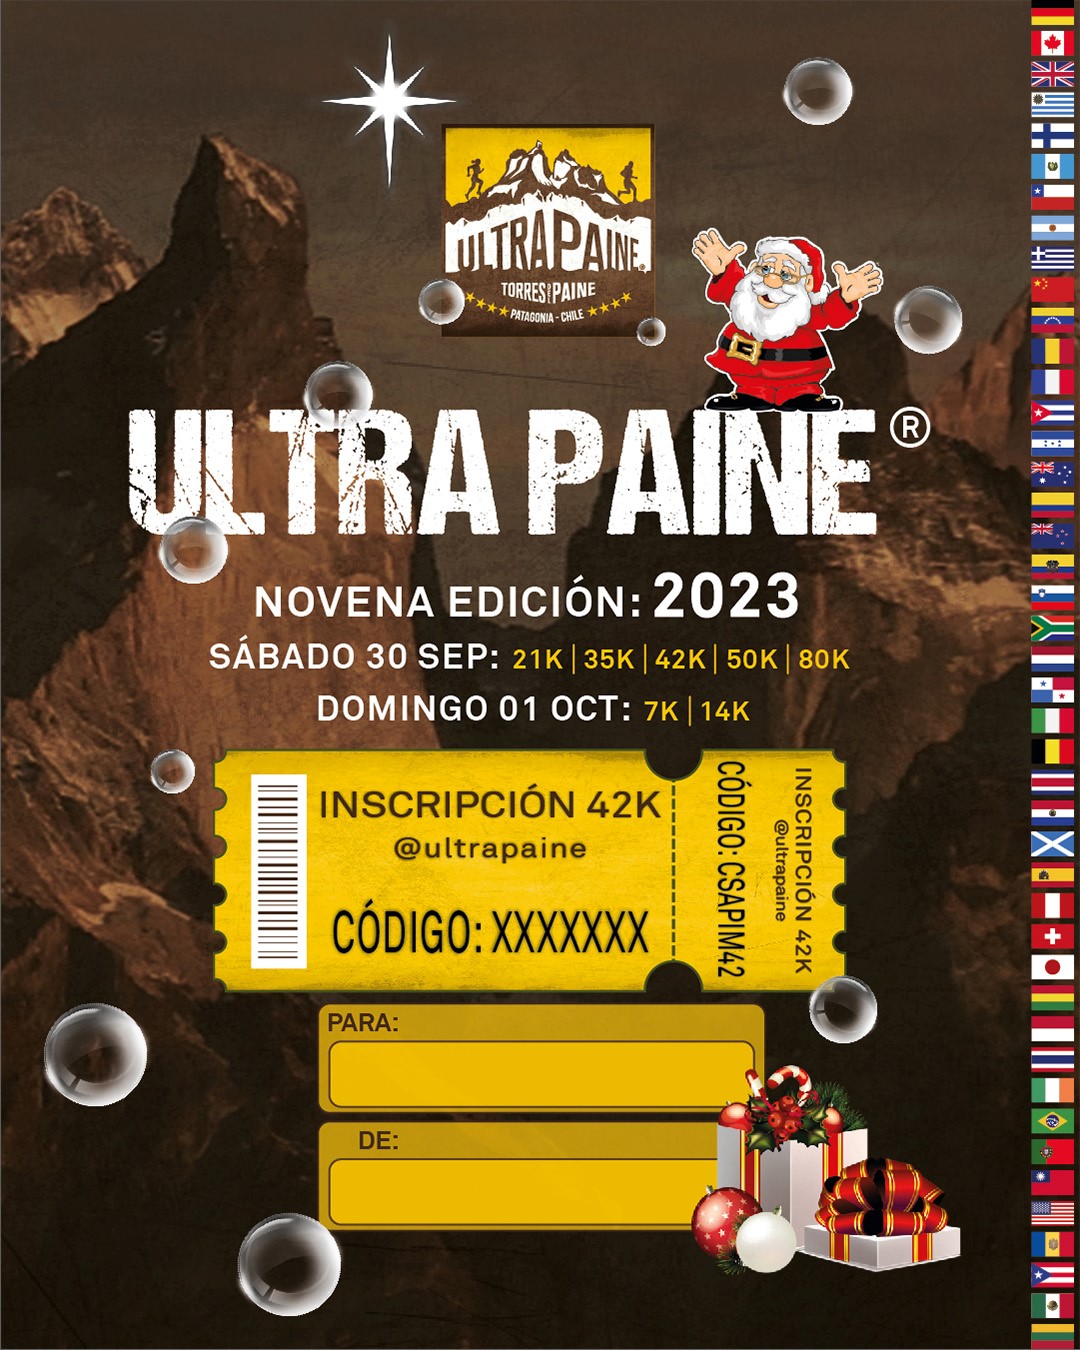 Gift a Registration Ultra Paine 2023